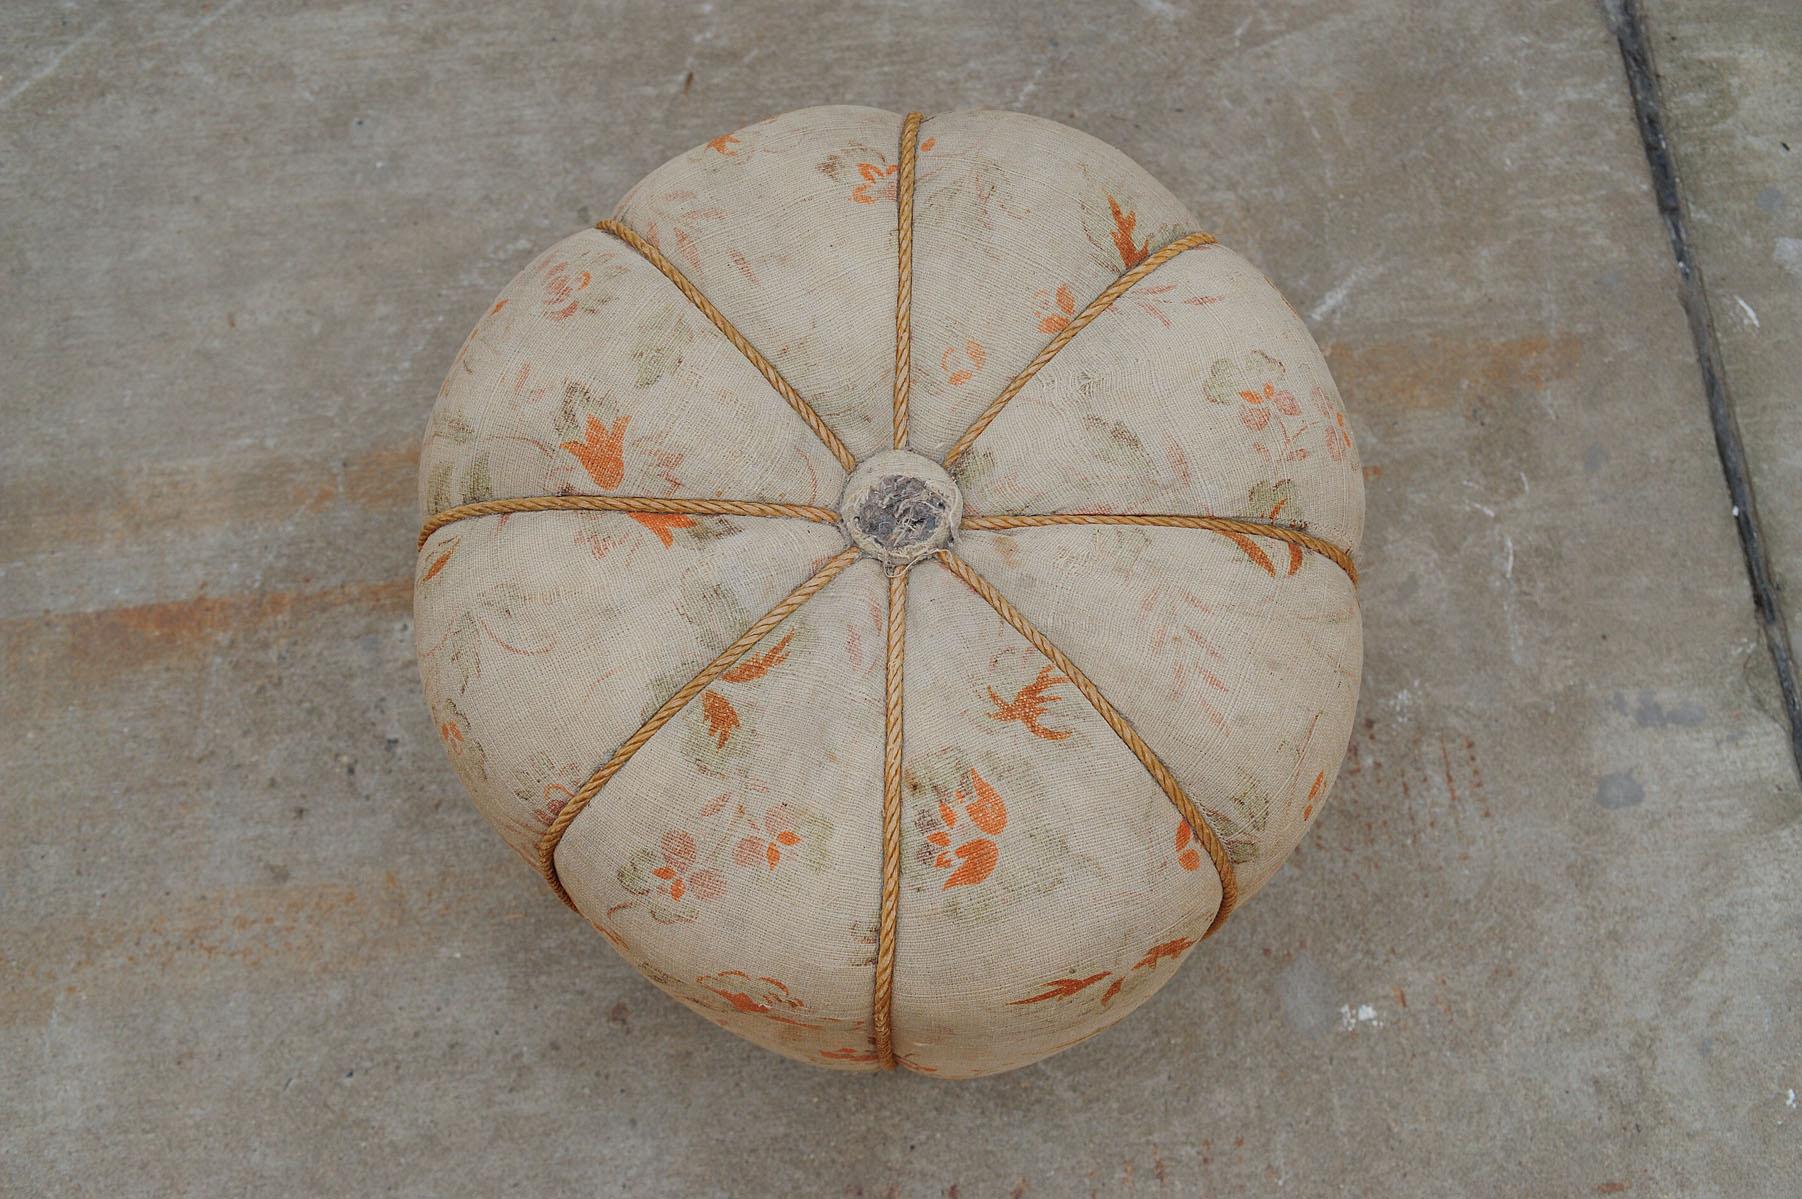 This strawbery shaped pouffe (footstool) was designed by Jindrich Halabala and produced by UP Závody in the 1950s. Very comfortable retro chic. The upholstery showing signs of age and using(worn fabric). But the pouffe is stable and in good